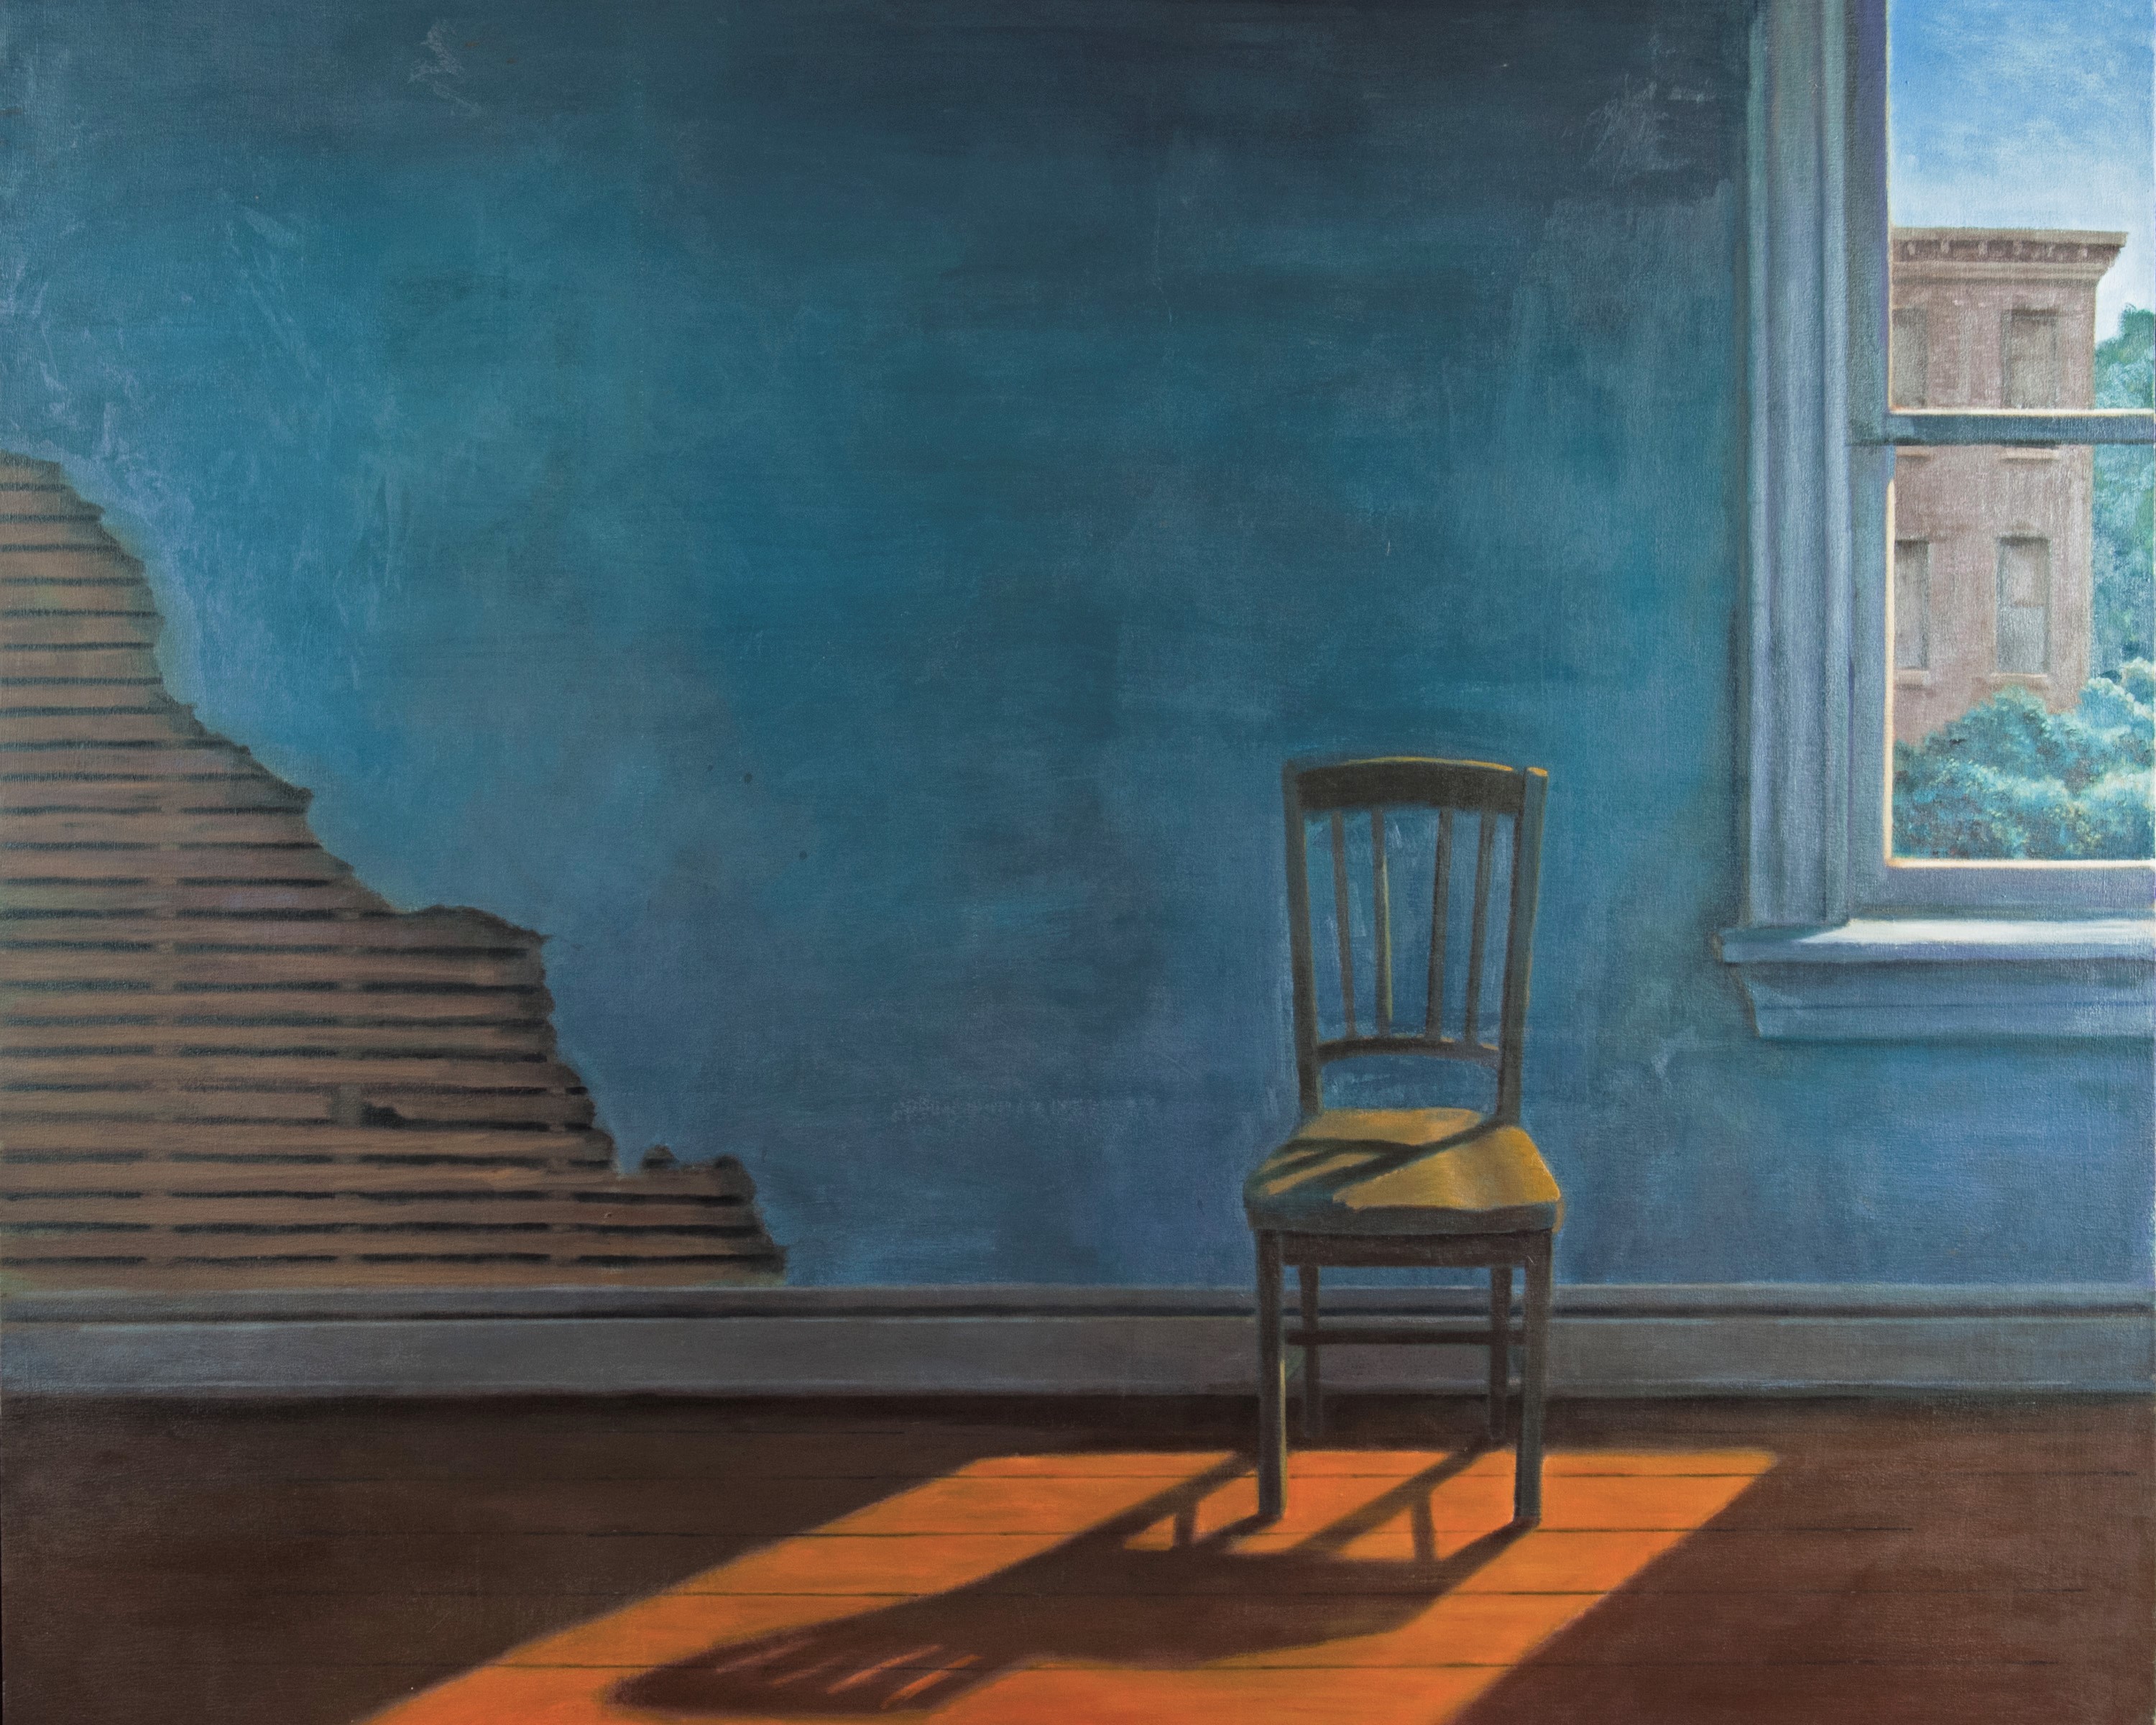 Christopher Brennan; Sun On An Empty Chair, 2006, Original Painting Oil, 60 x 50 inches. 